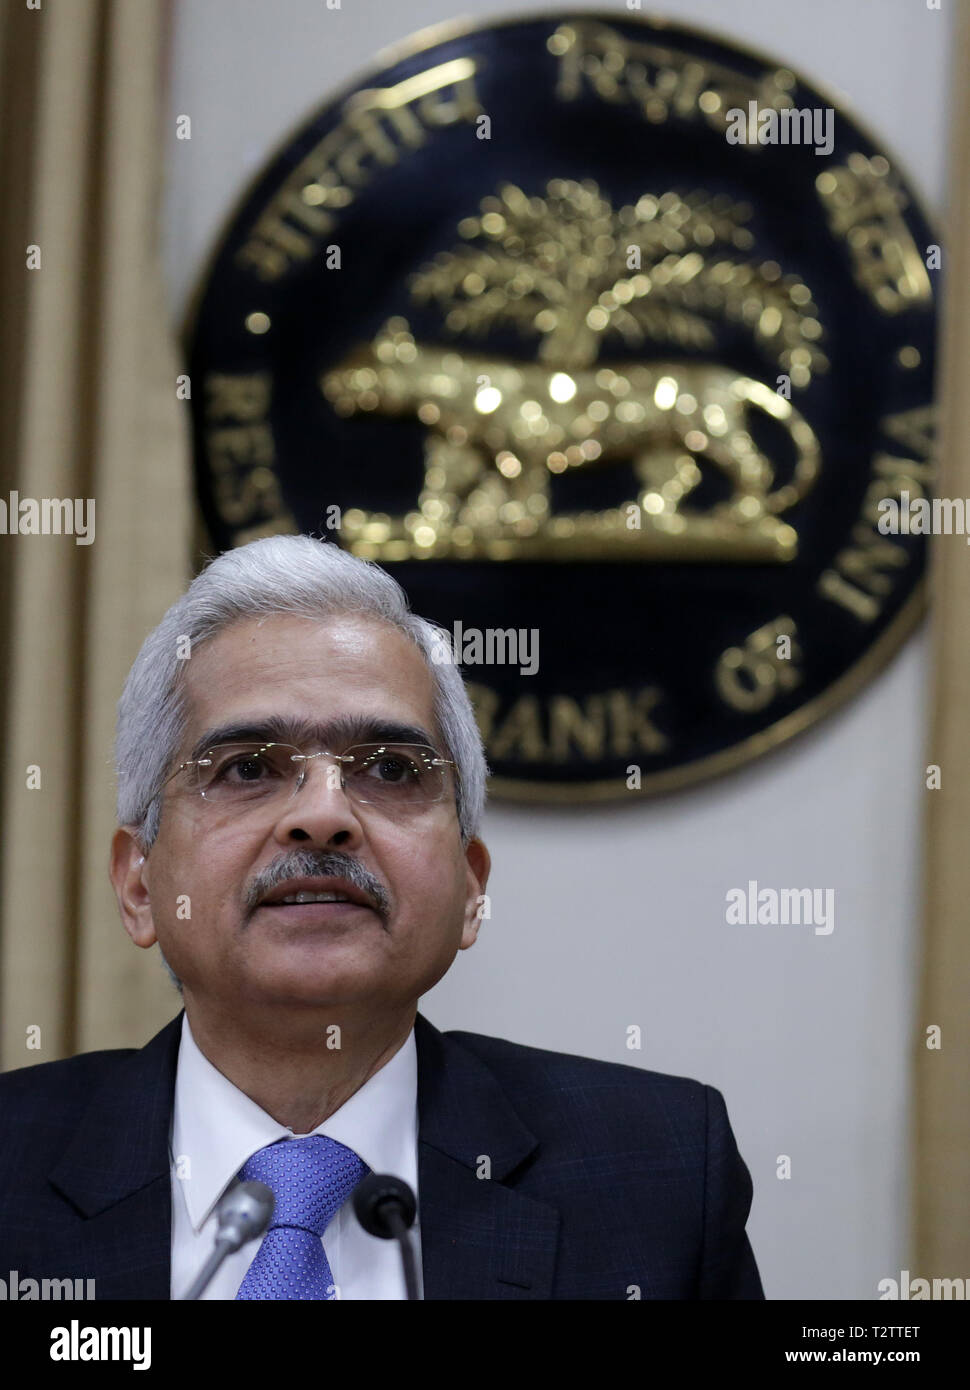 Mumbai. 4th Apr, 2019. The Reserve Bank of India (RBI) Governor Shaktikanta Das speaks during the media conference after a monetary policy review statement at the RBI head office in Mumbai, India, April 4, 2019. Credit: Xinhua/Alamy Live News Stock Photo